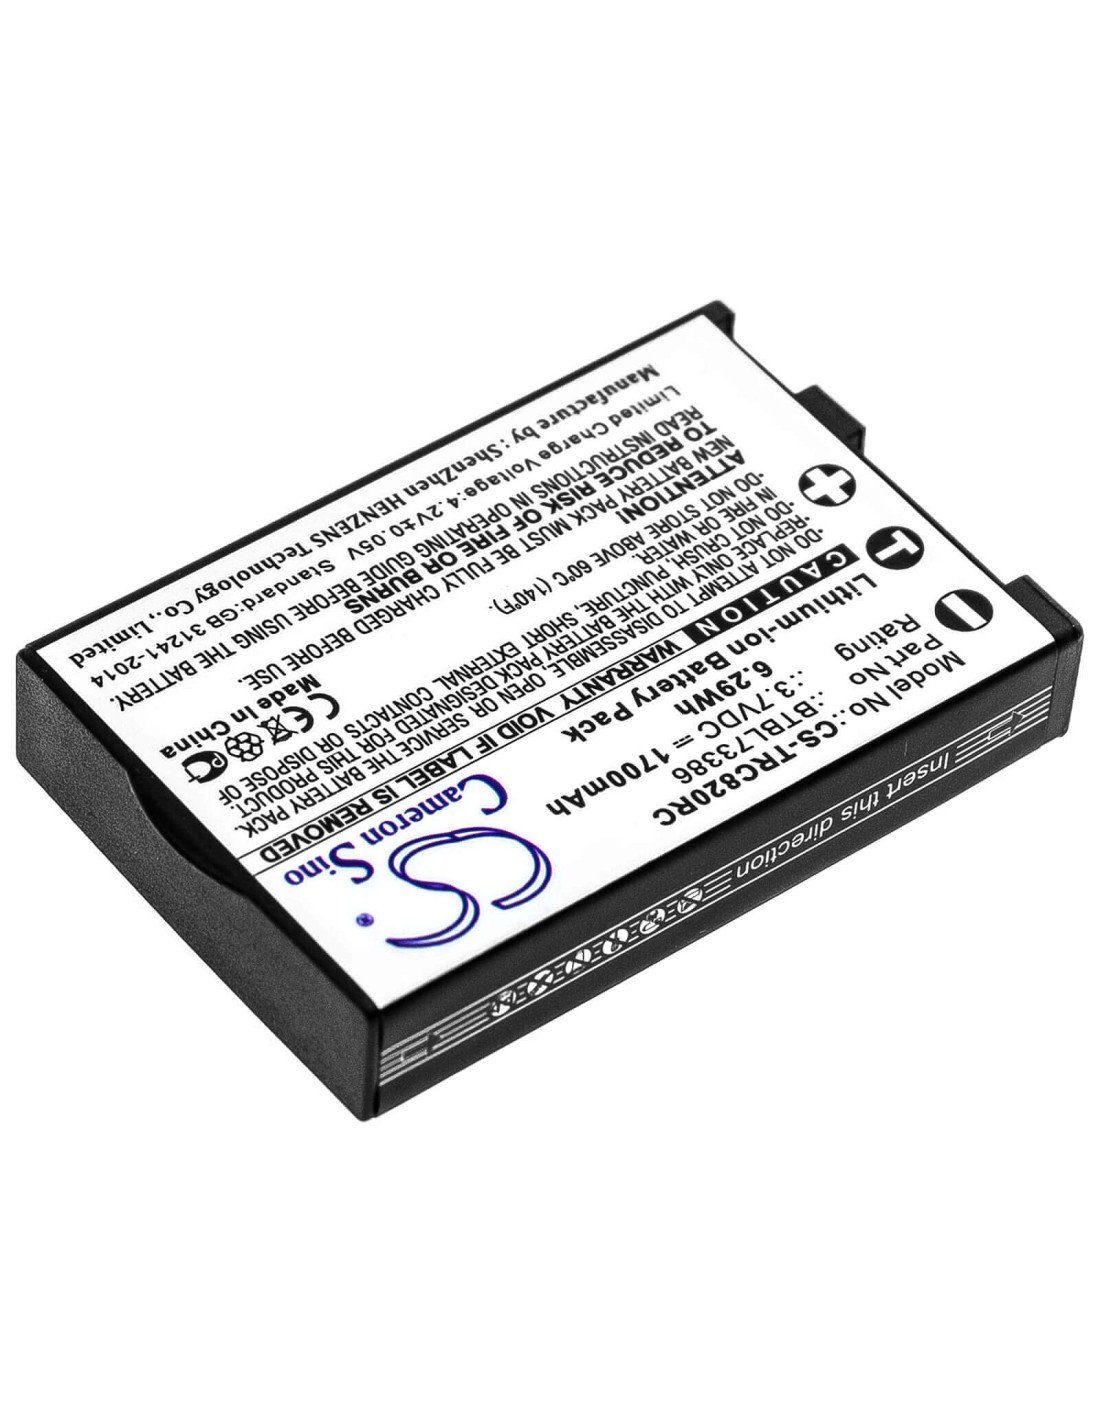 Battery for Urc, Mxhp-r500, Mxhp-r700, R100 3.7V, 1700mAh - 6.29Wh